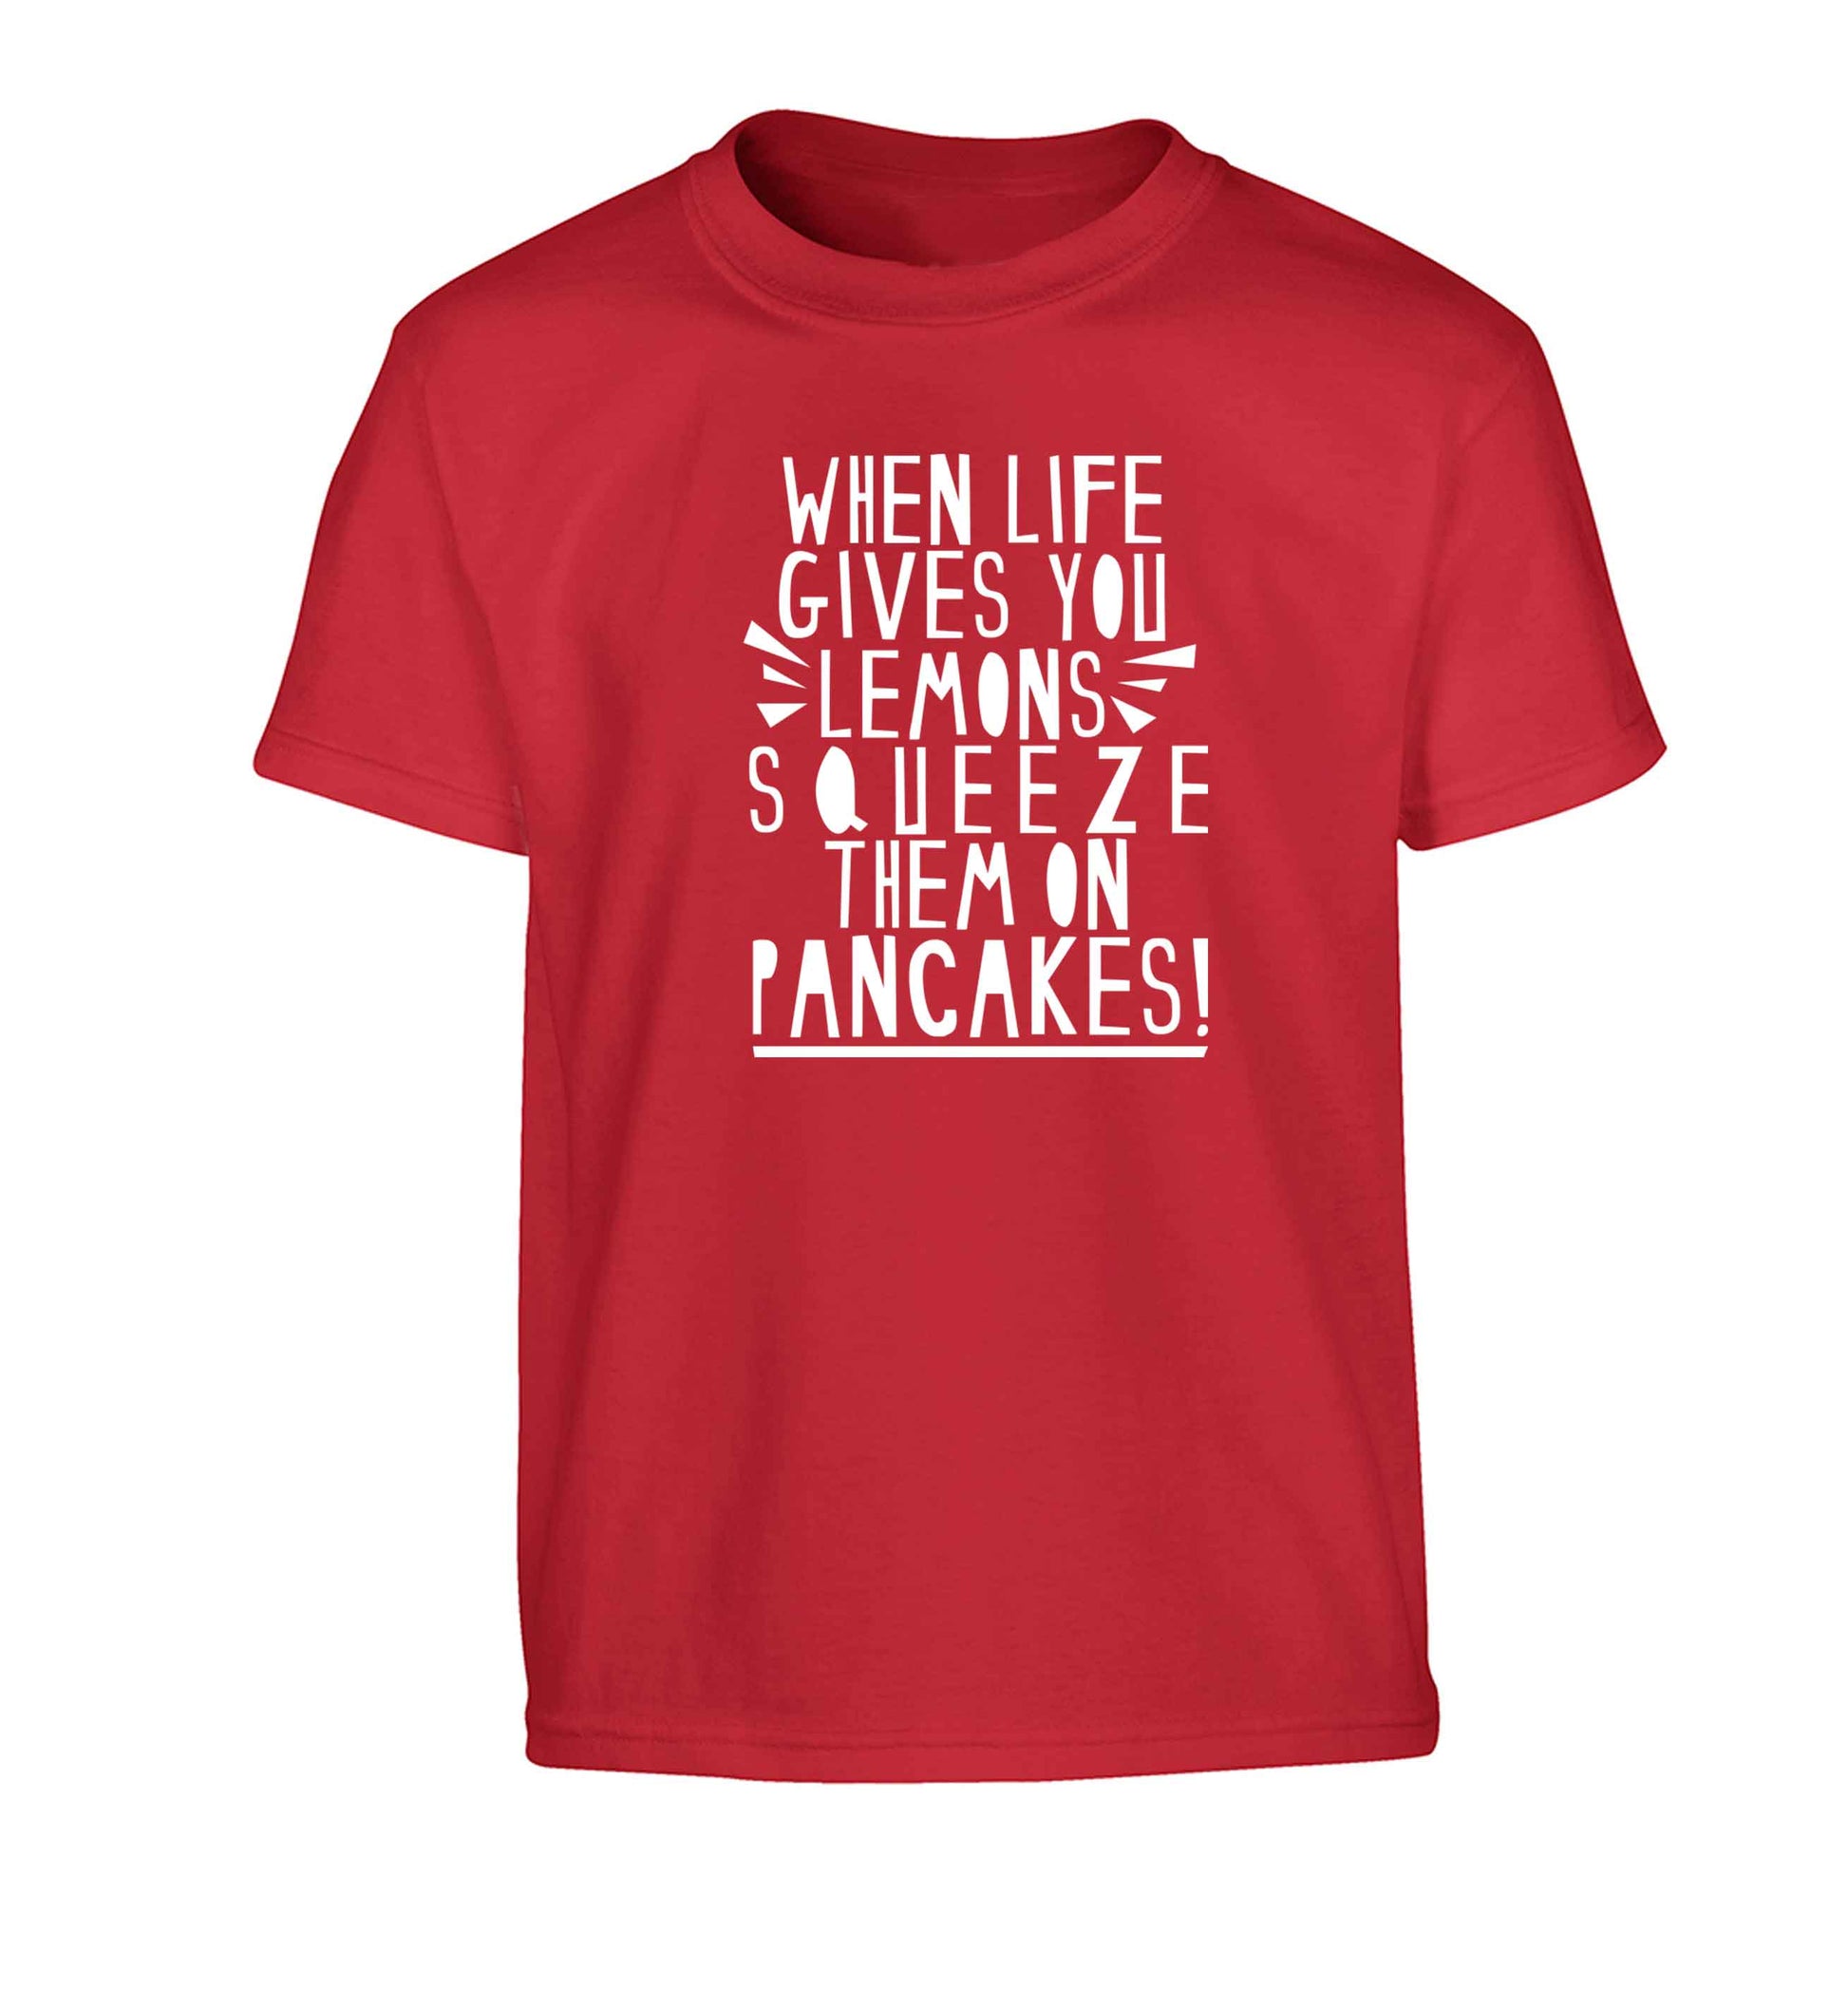 When life gives you lemons squeeze them on pancakes! Children's red Tshirt 12-13 Years